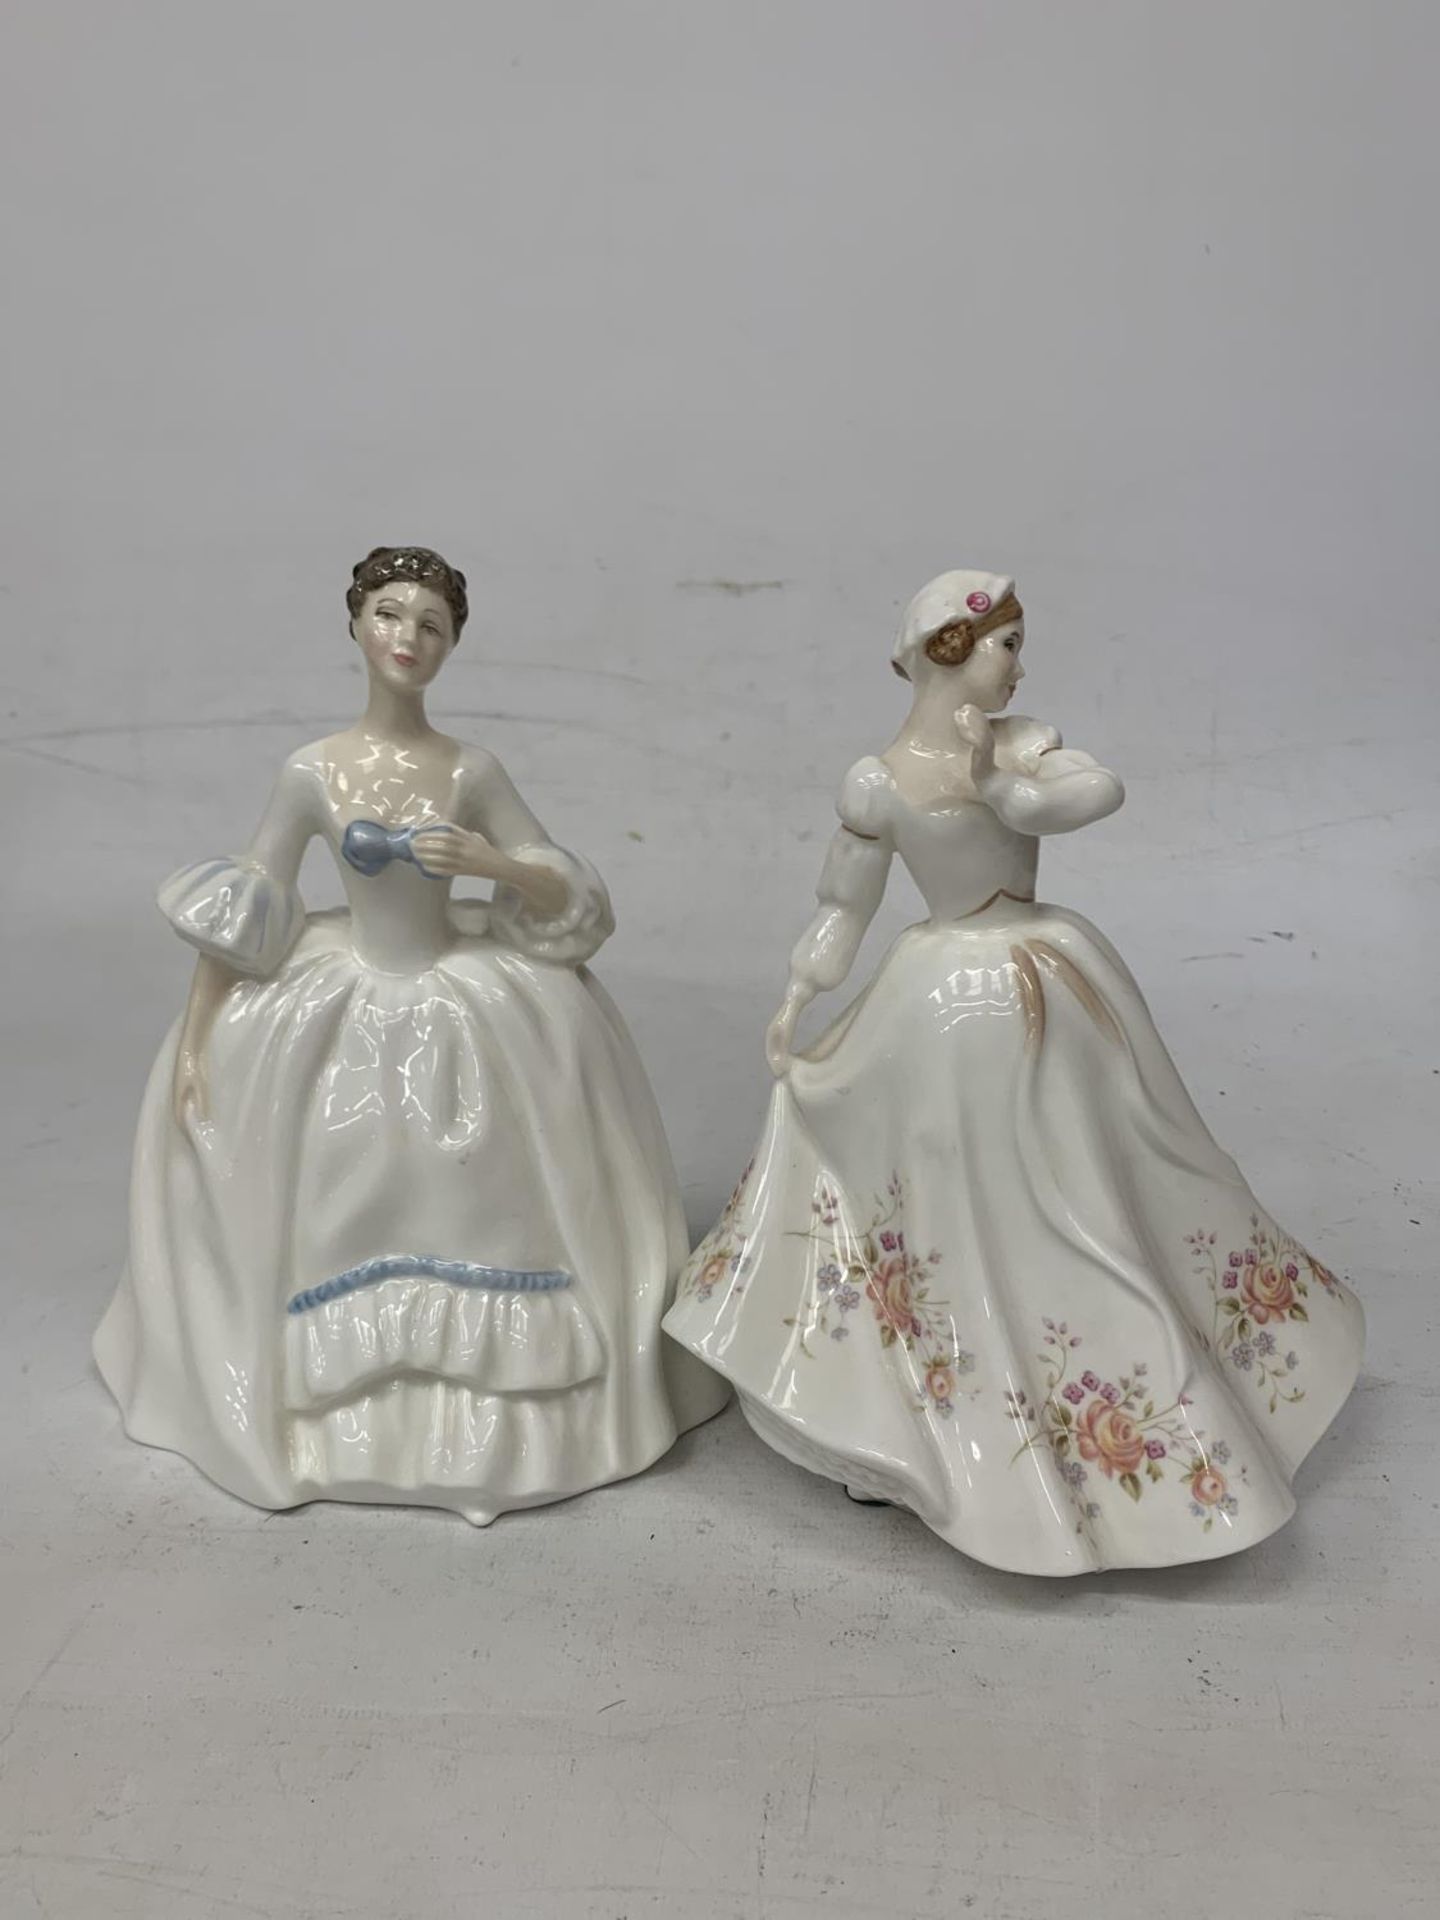 TWO ROYAL DOULTON FIGURES "ROSEMARY" HN 3143 AND "KELLY" HN 3222